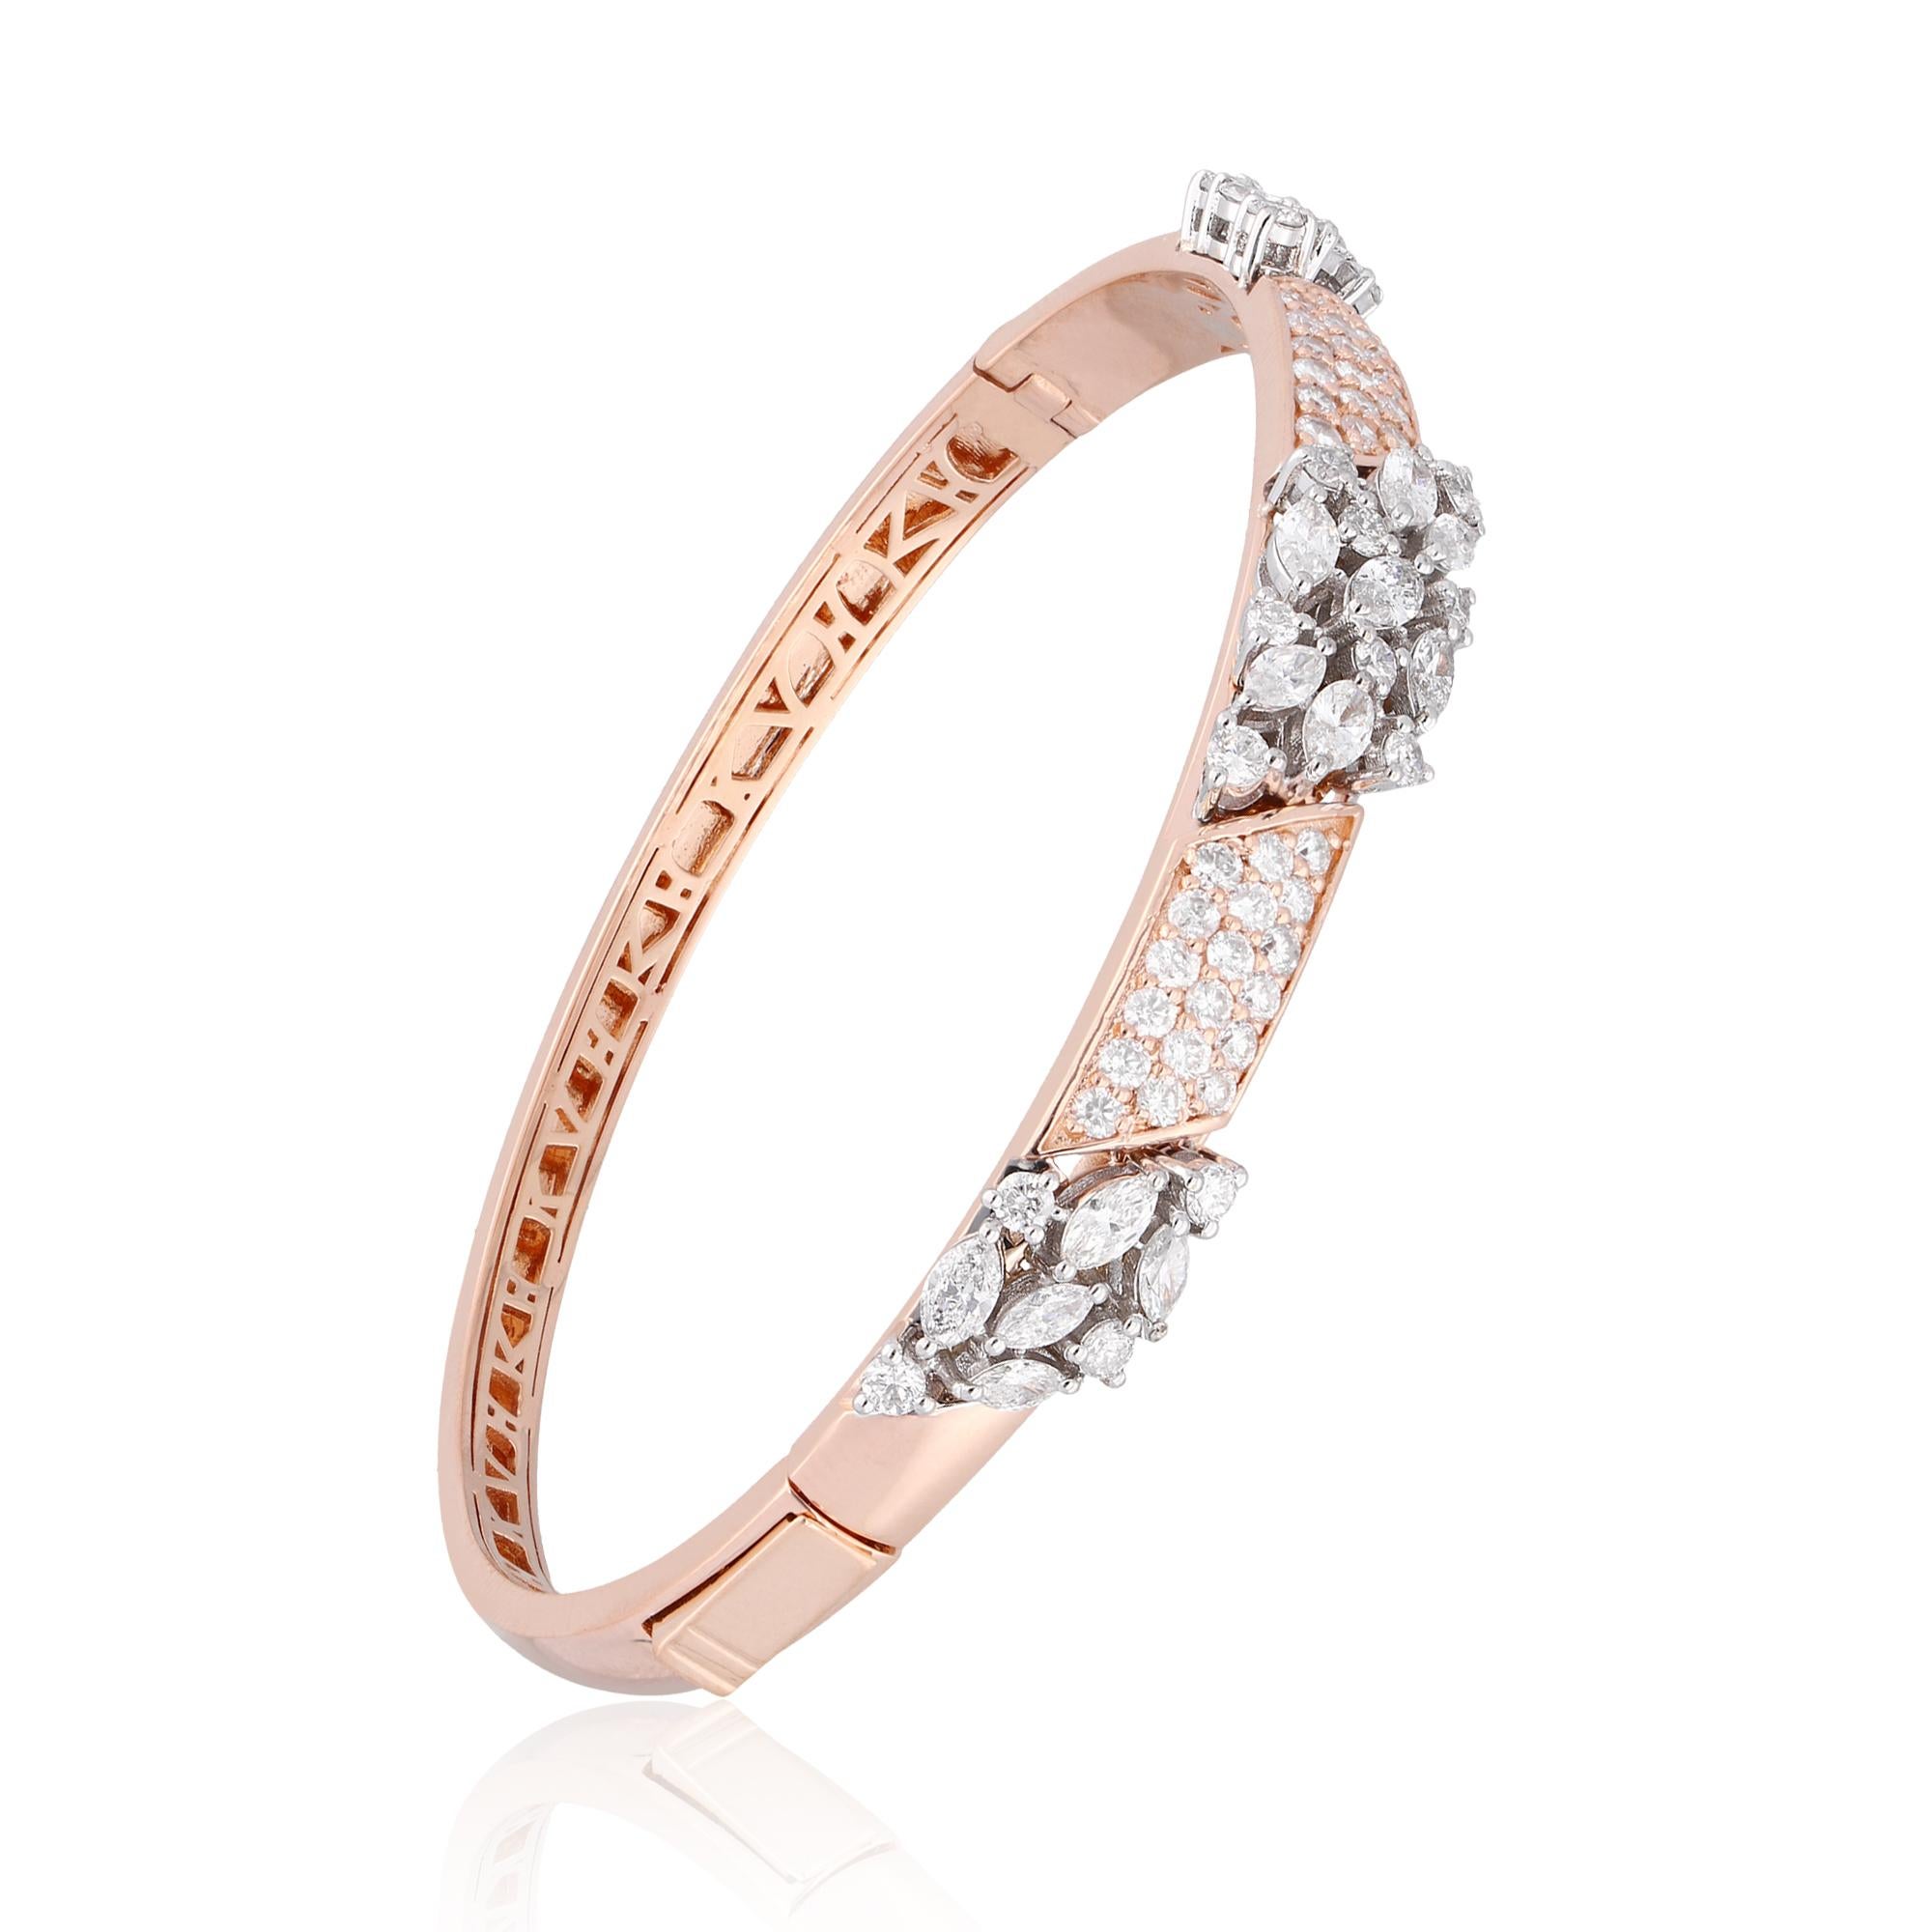 Item Code :- SJEB-3057
Gross Weight :- 21.74 gm
18k Rose Gold Weight :- 21.13 gm
Diamond Weight :- 3.05 Carat  ( AVERAGE DIAMOND CLARITY SI1-SI2 & COLOR H-I )

✦ Sizing
.....................
We can adjust most items to fit your sizing preferences.